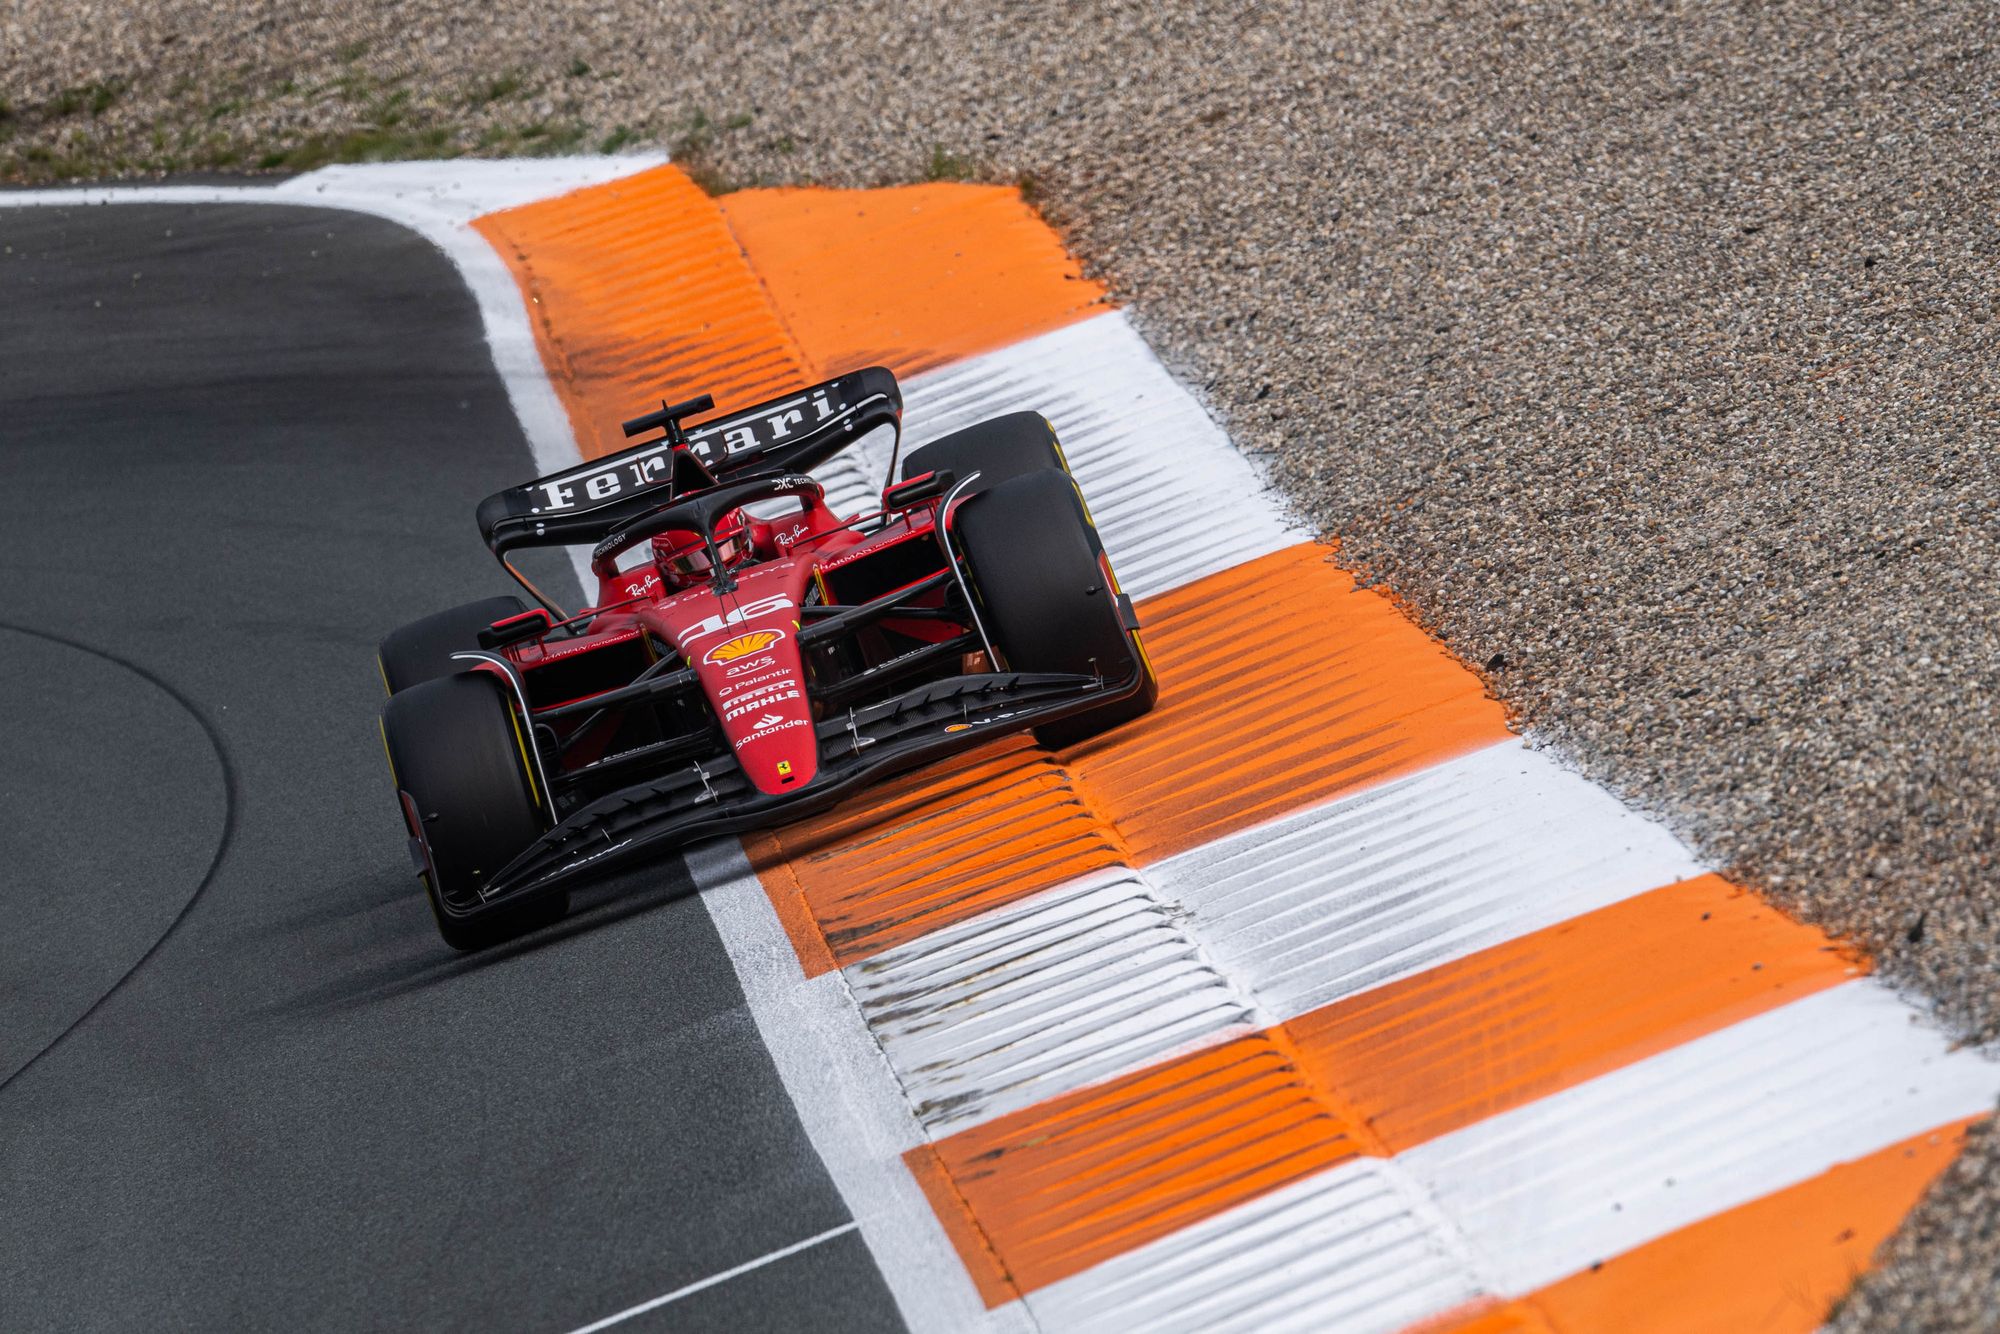 Ferrari cannot repeat mistake of too high expectations for F1 2024 -  Vasseur